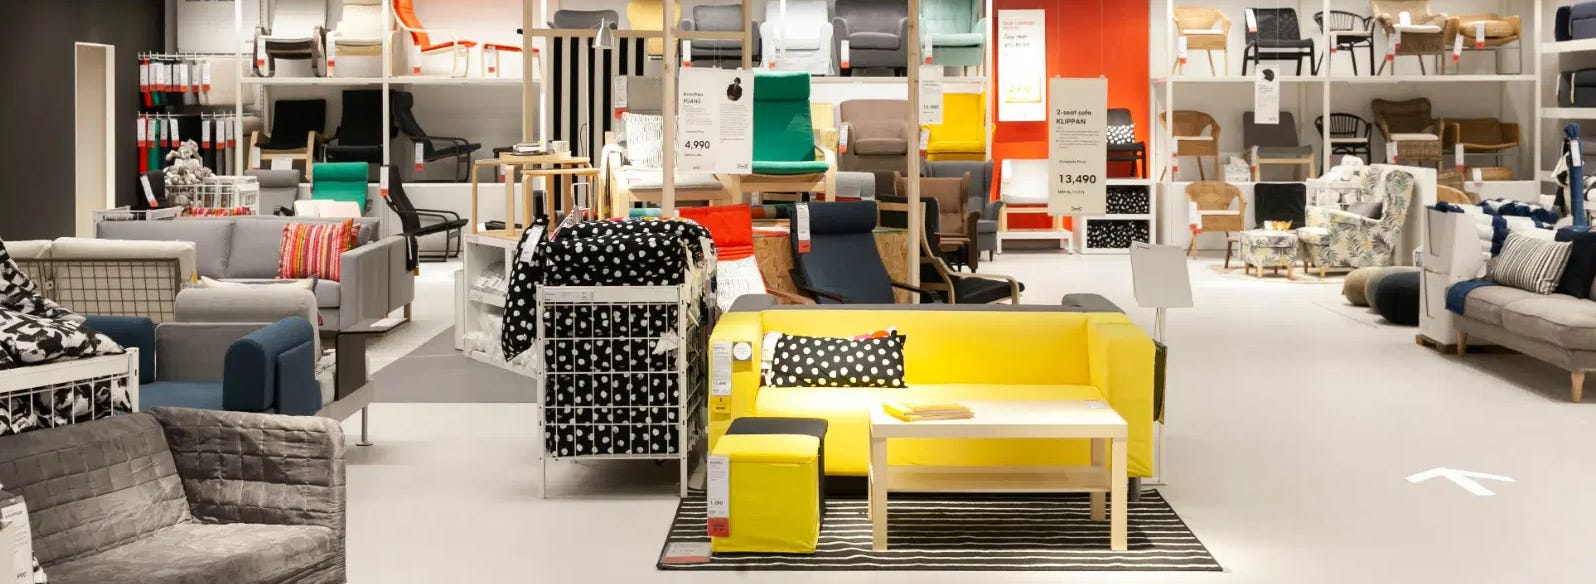 ikea pricing strategy case study